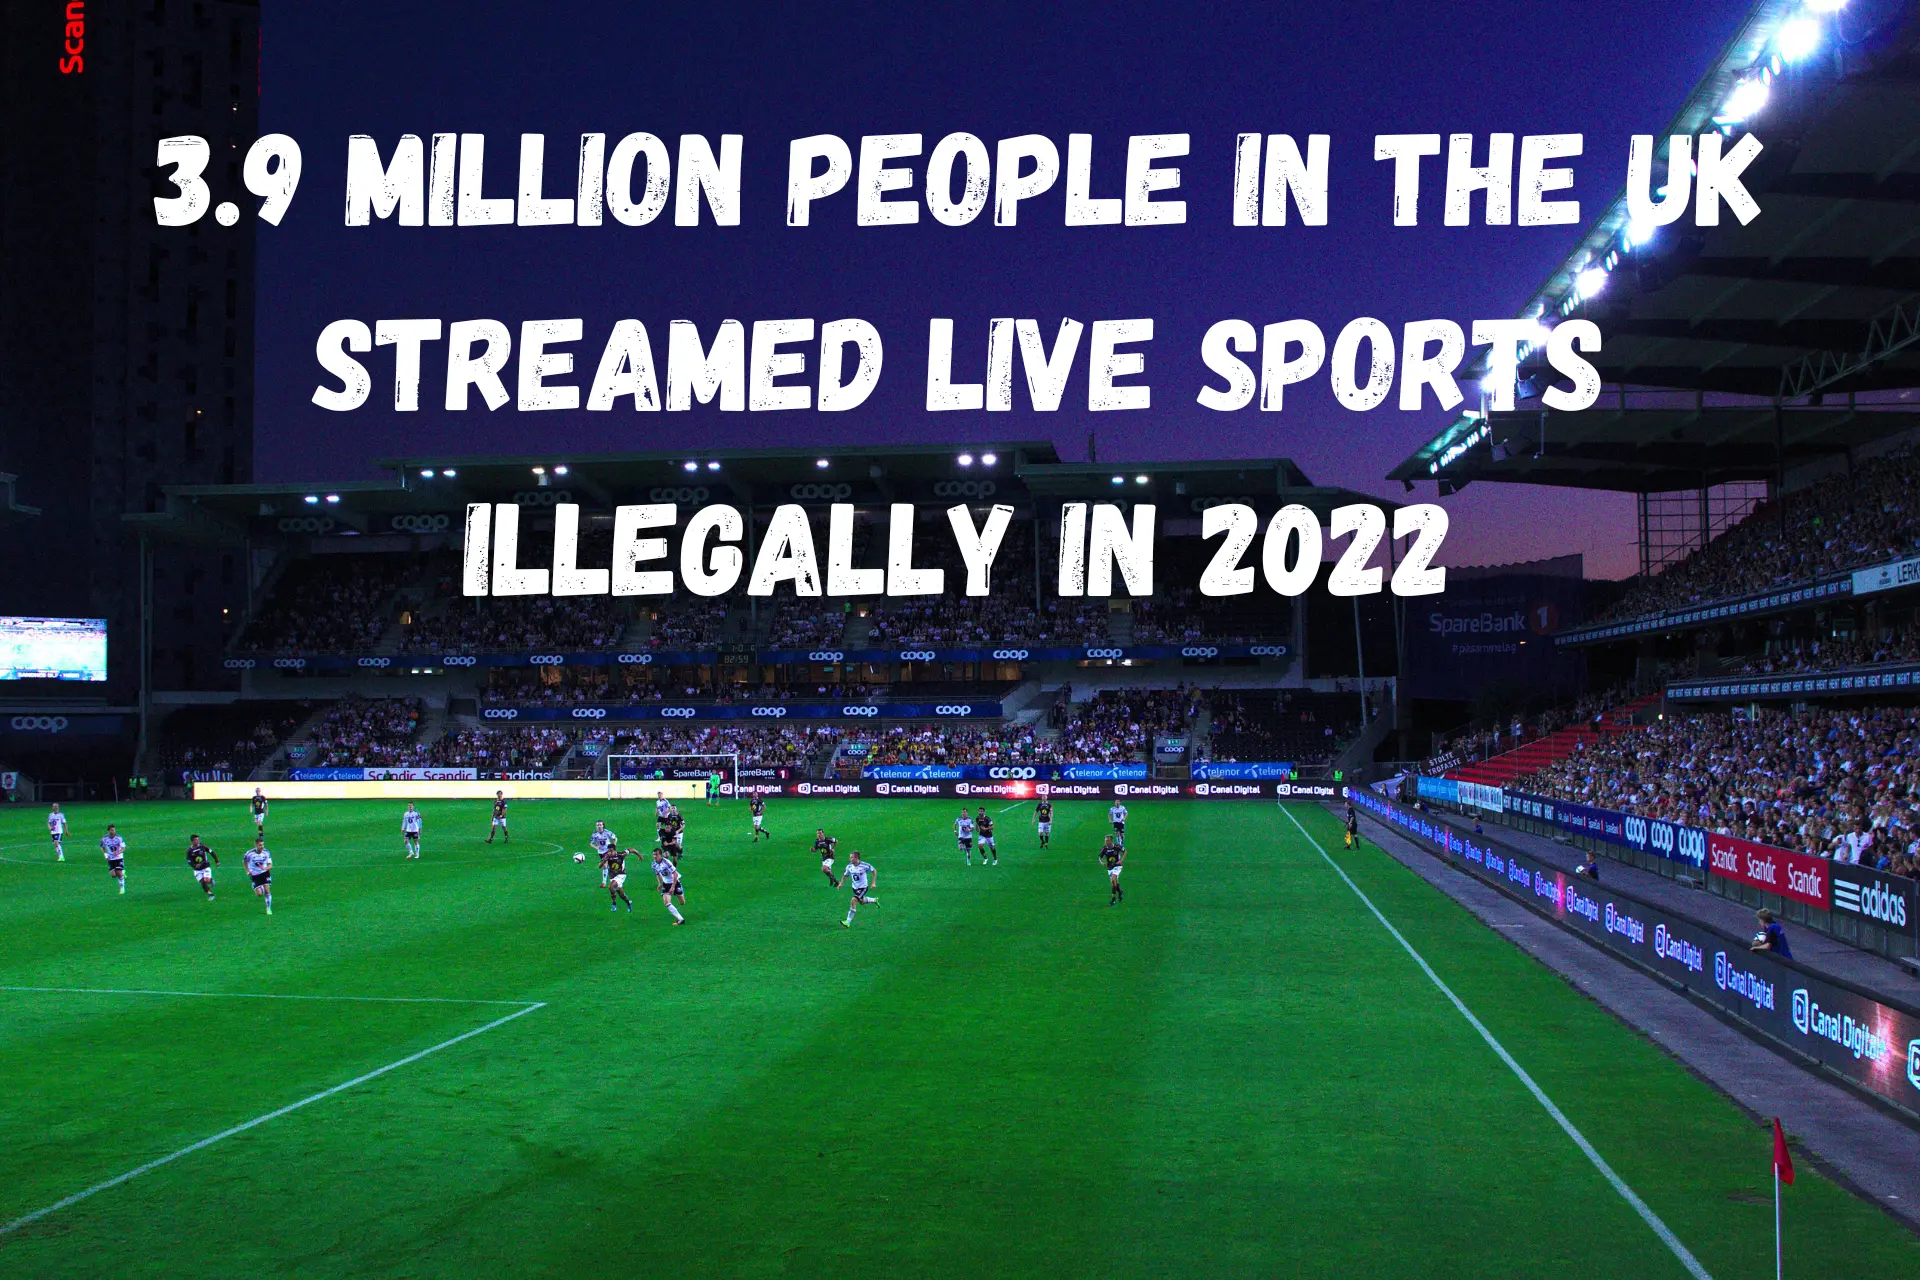 3.9 million people in the UK streamed live sports illegally in 2022